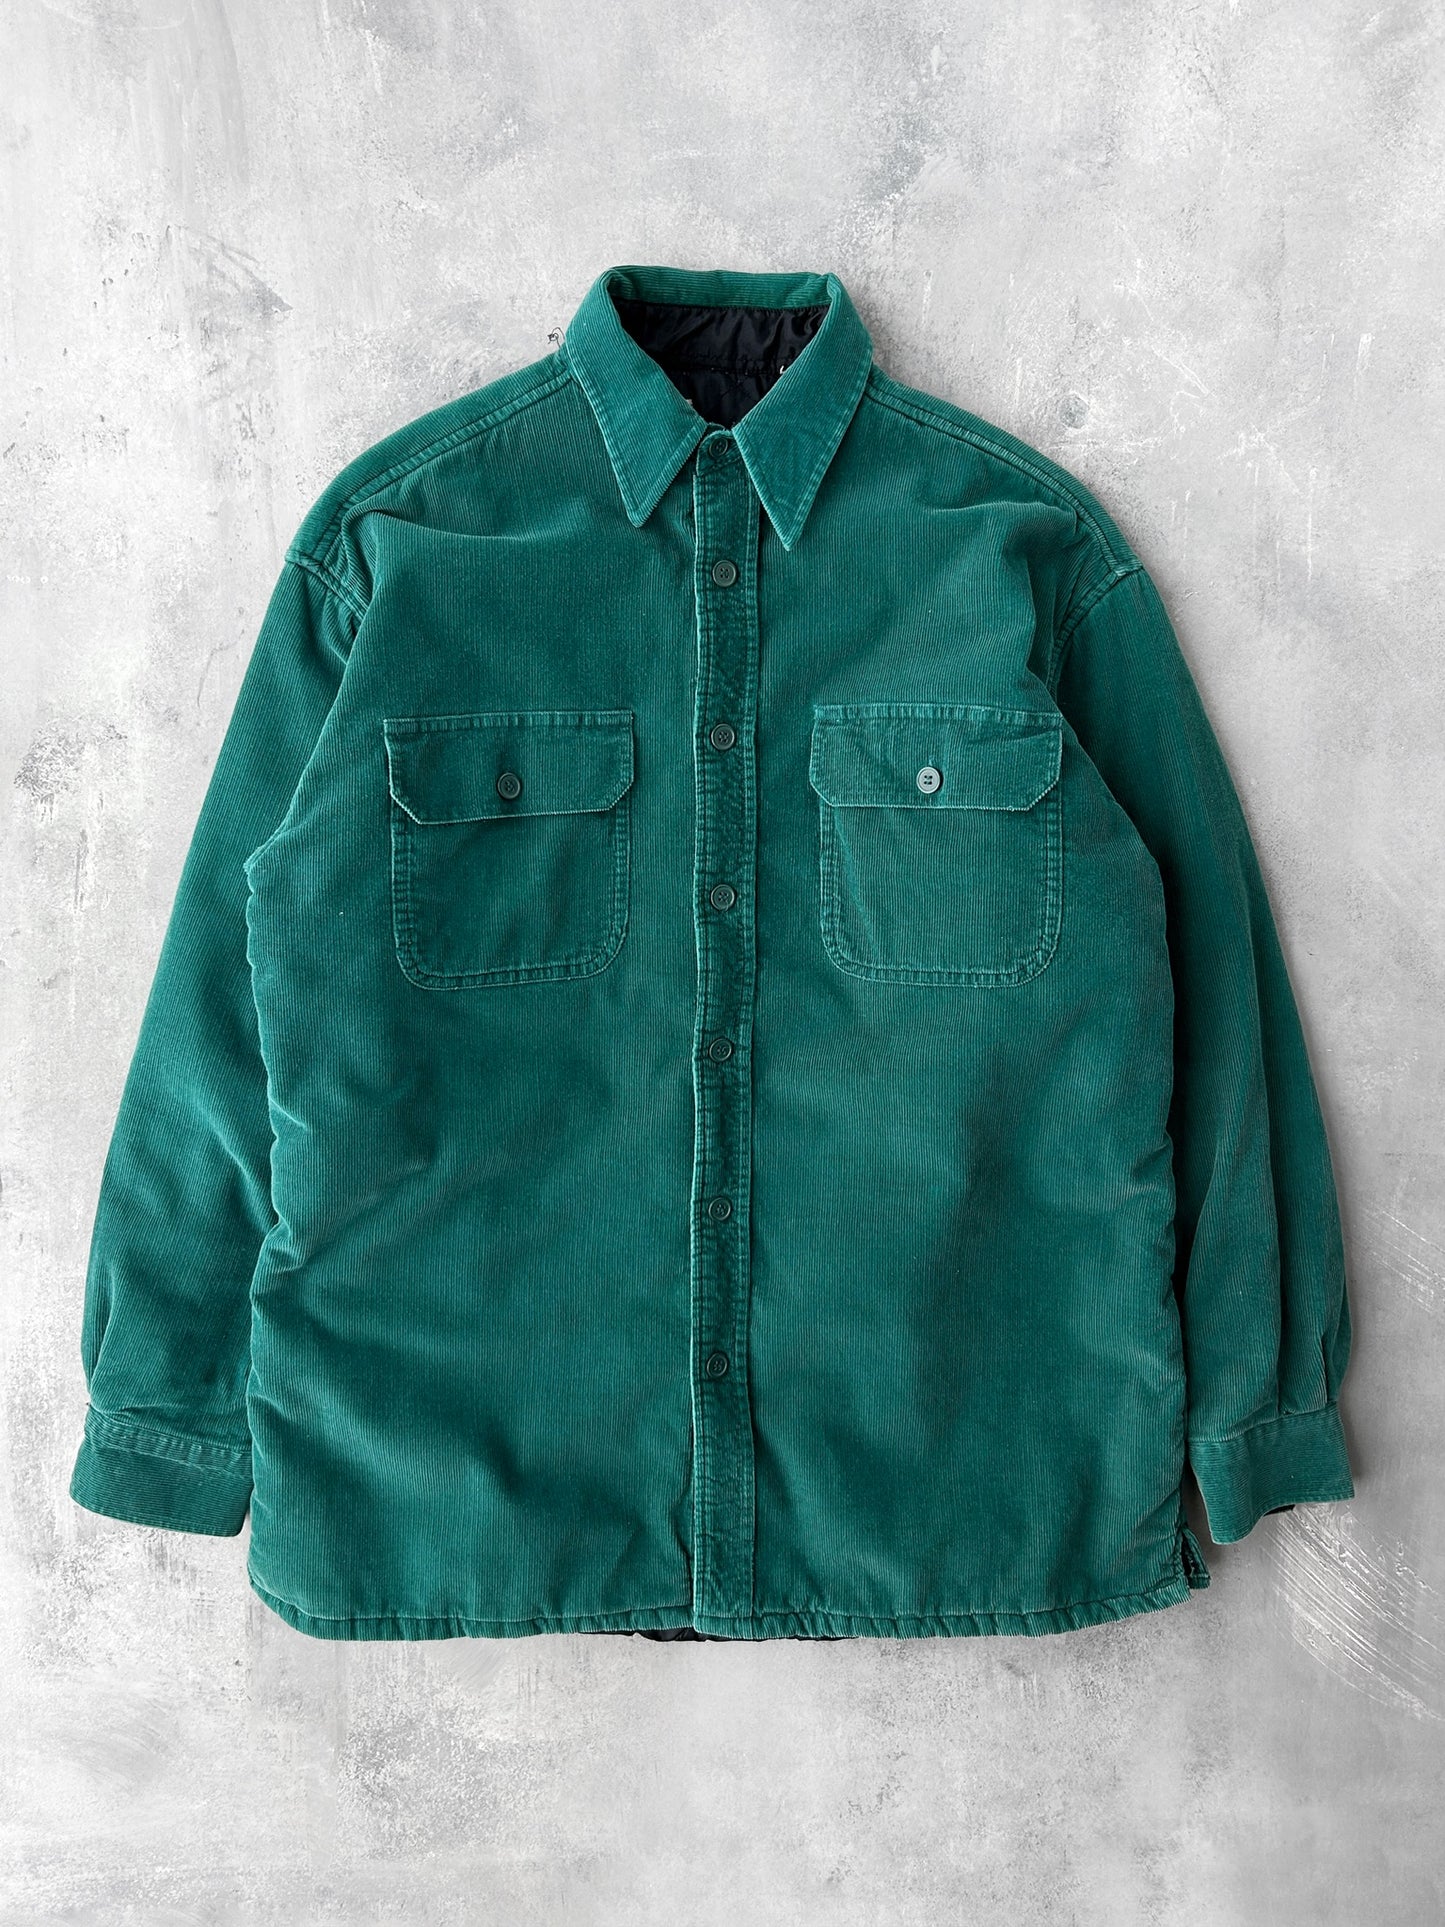 Insulated Corduroy Shirt 00's - Large